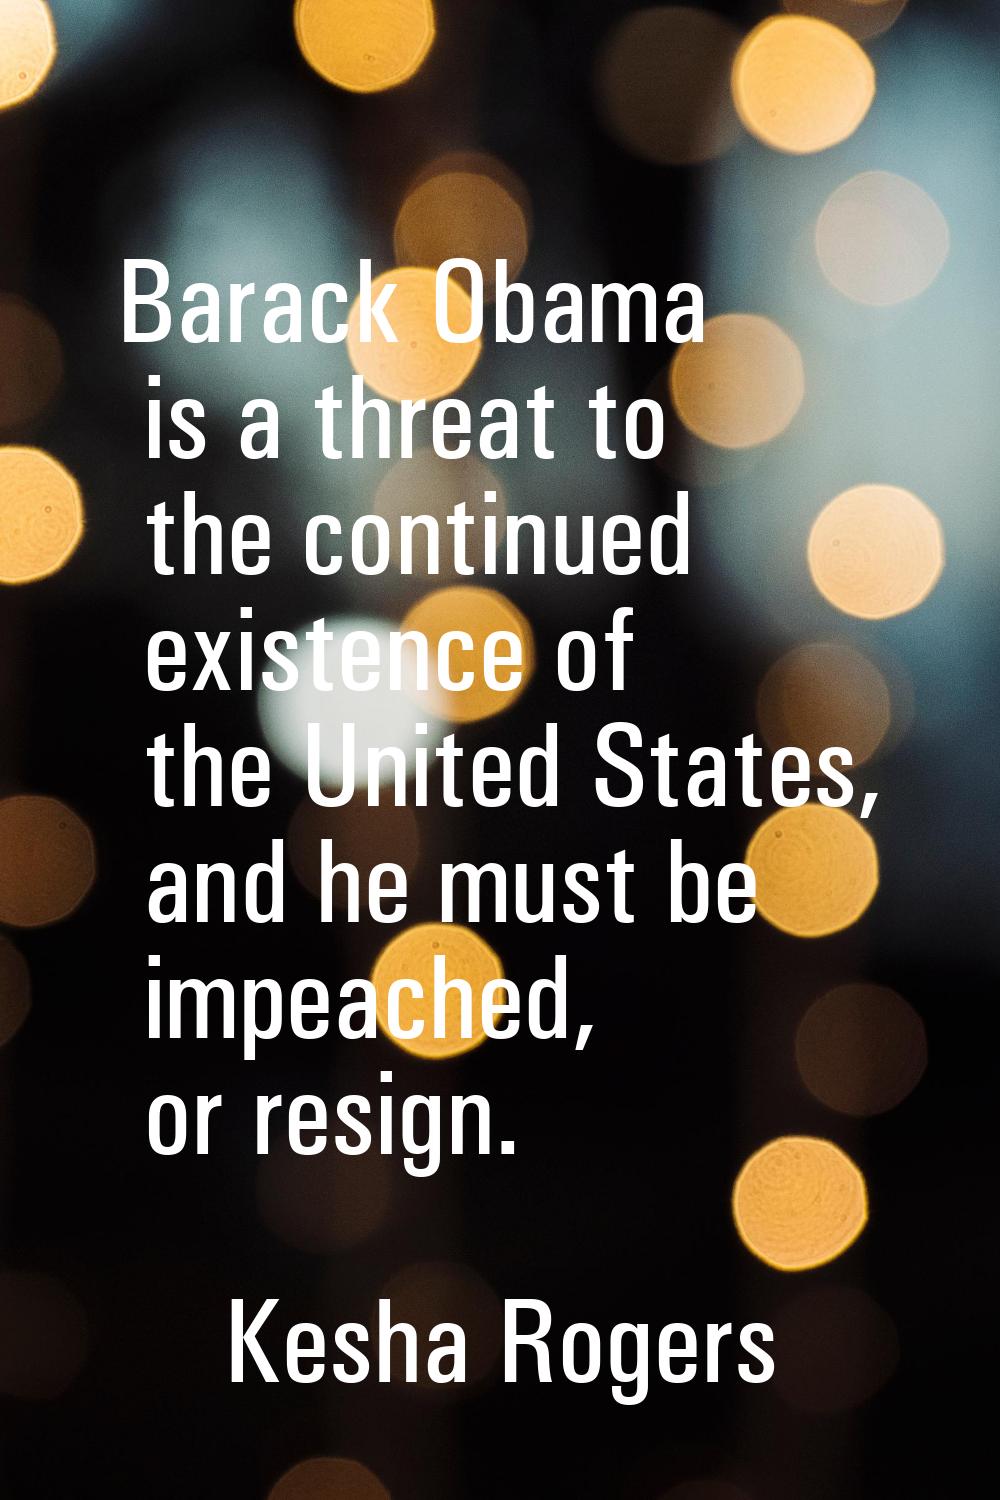 Barack Obama is a threat to the continued existence of the United States, and he must be impeached,